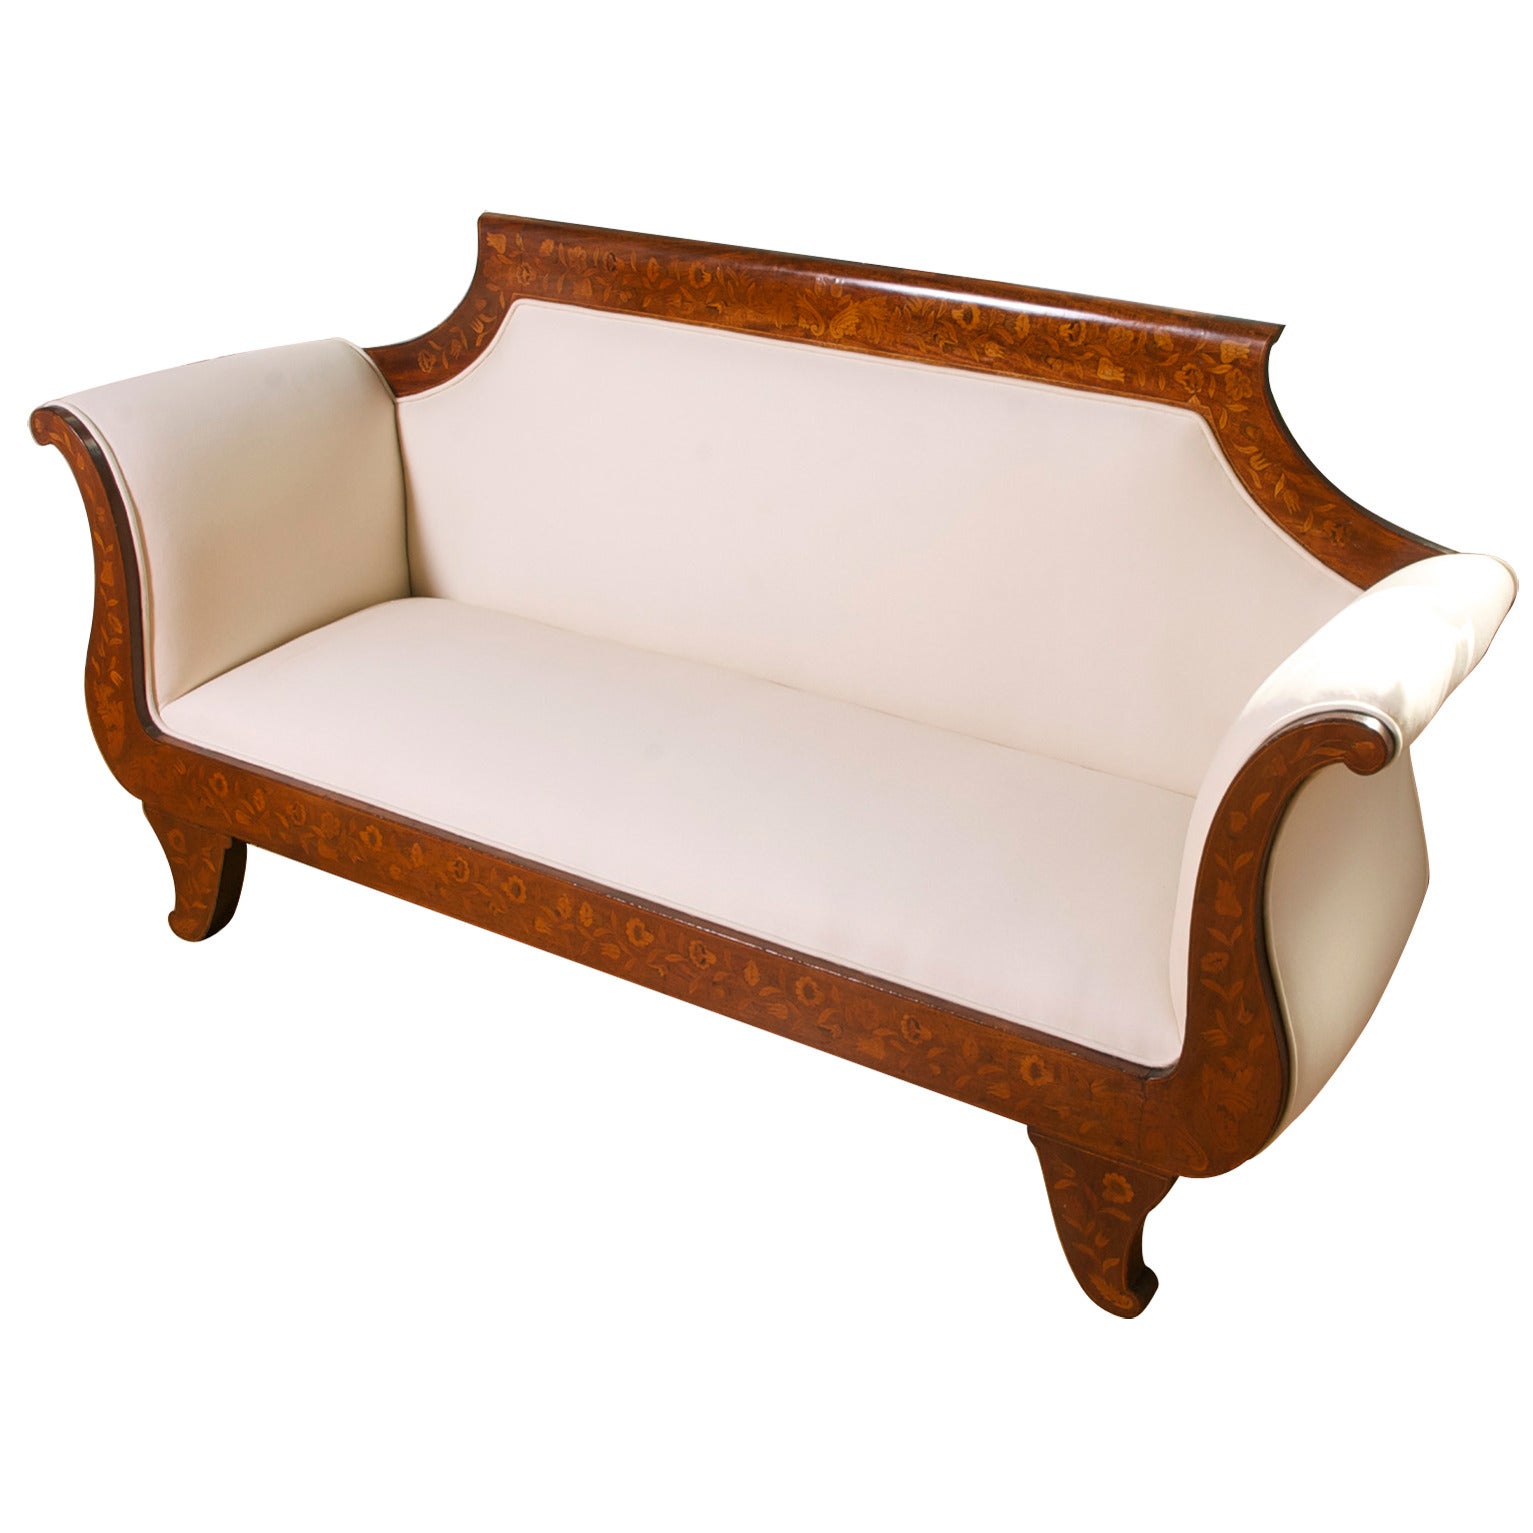 Inlay Dutch Marquetry Empire Settee, circa 1825 For Sale